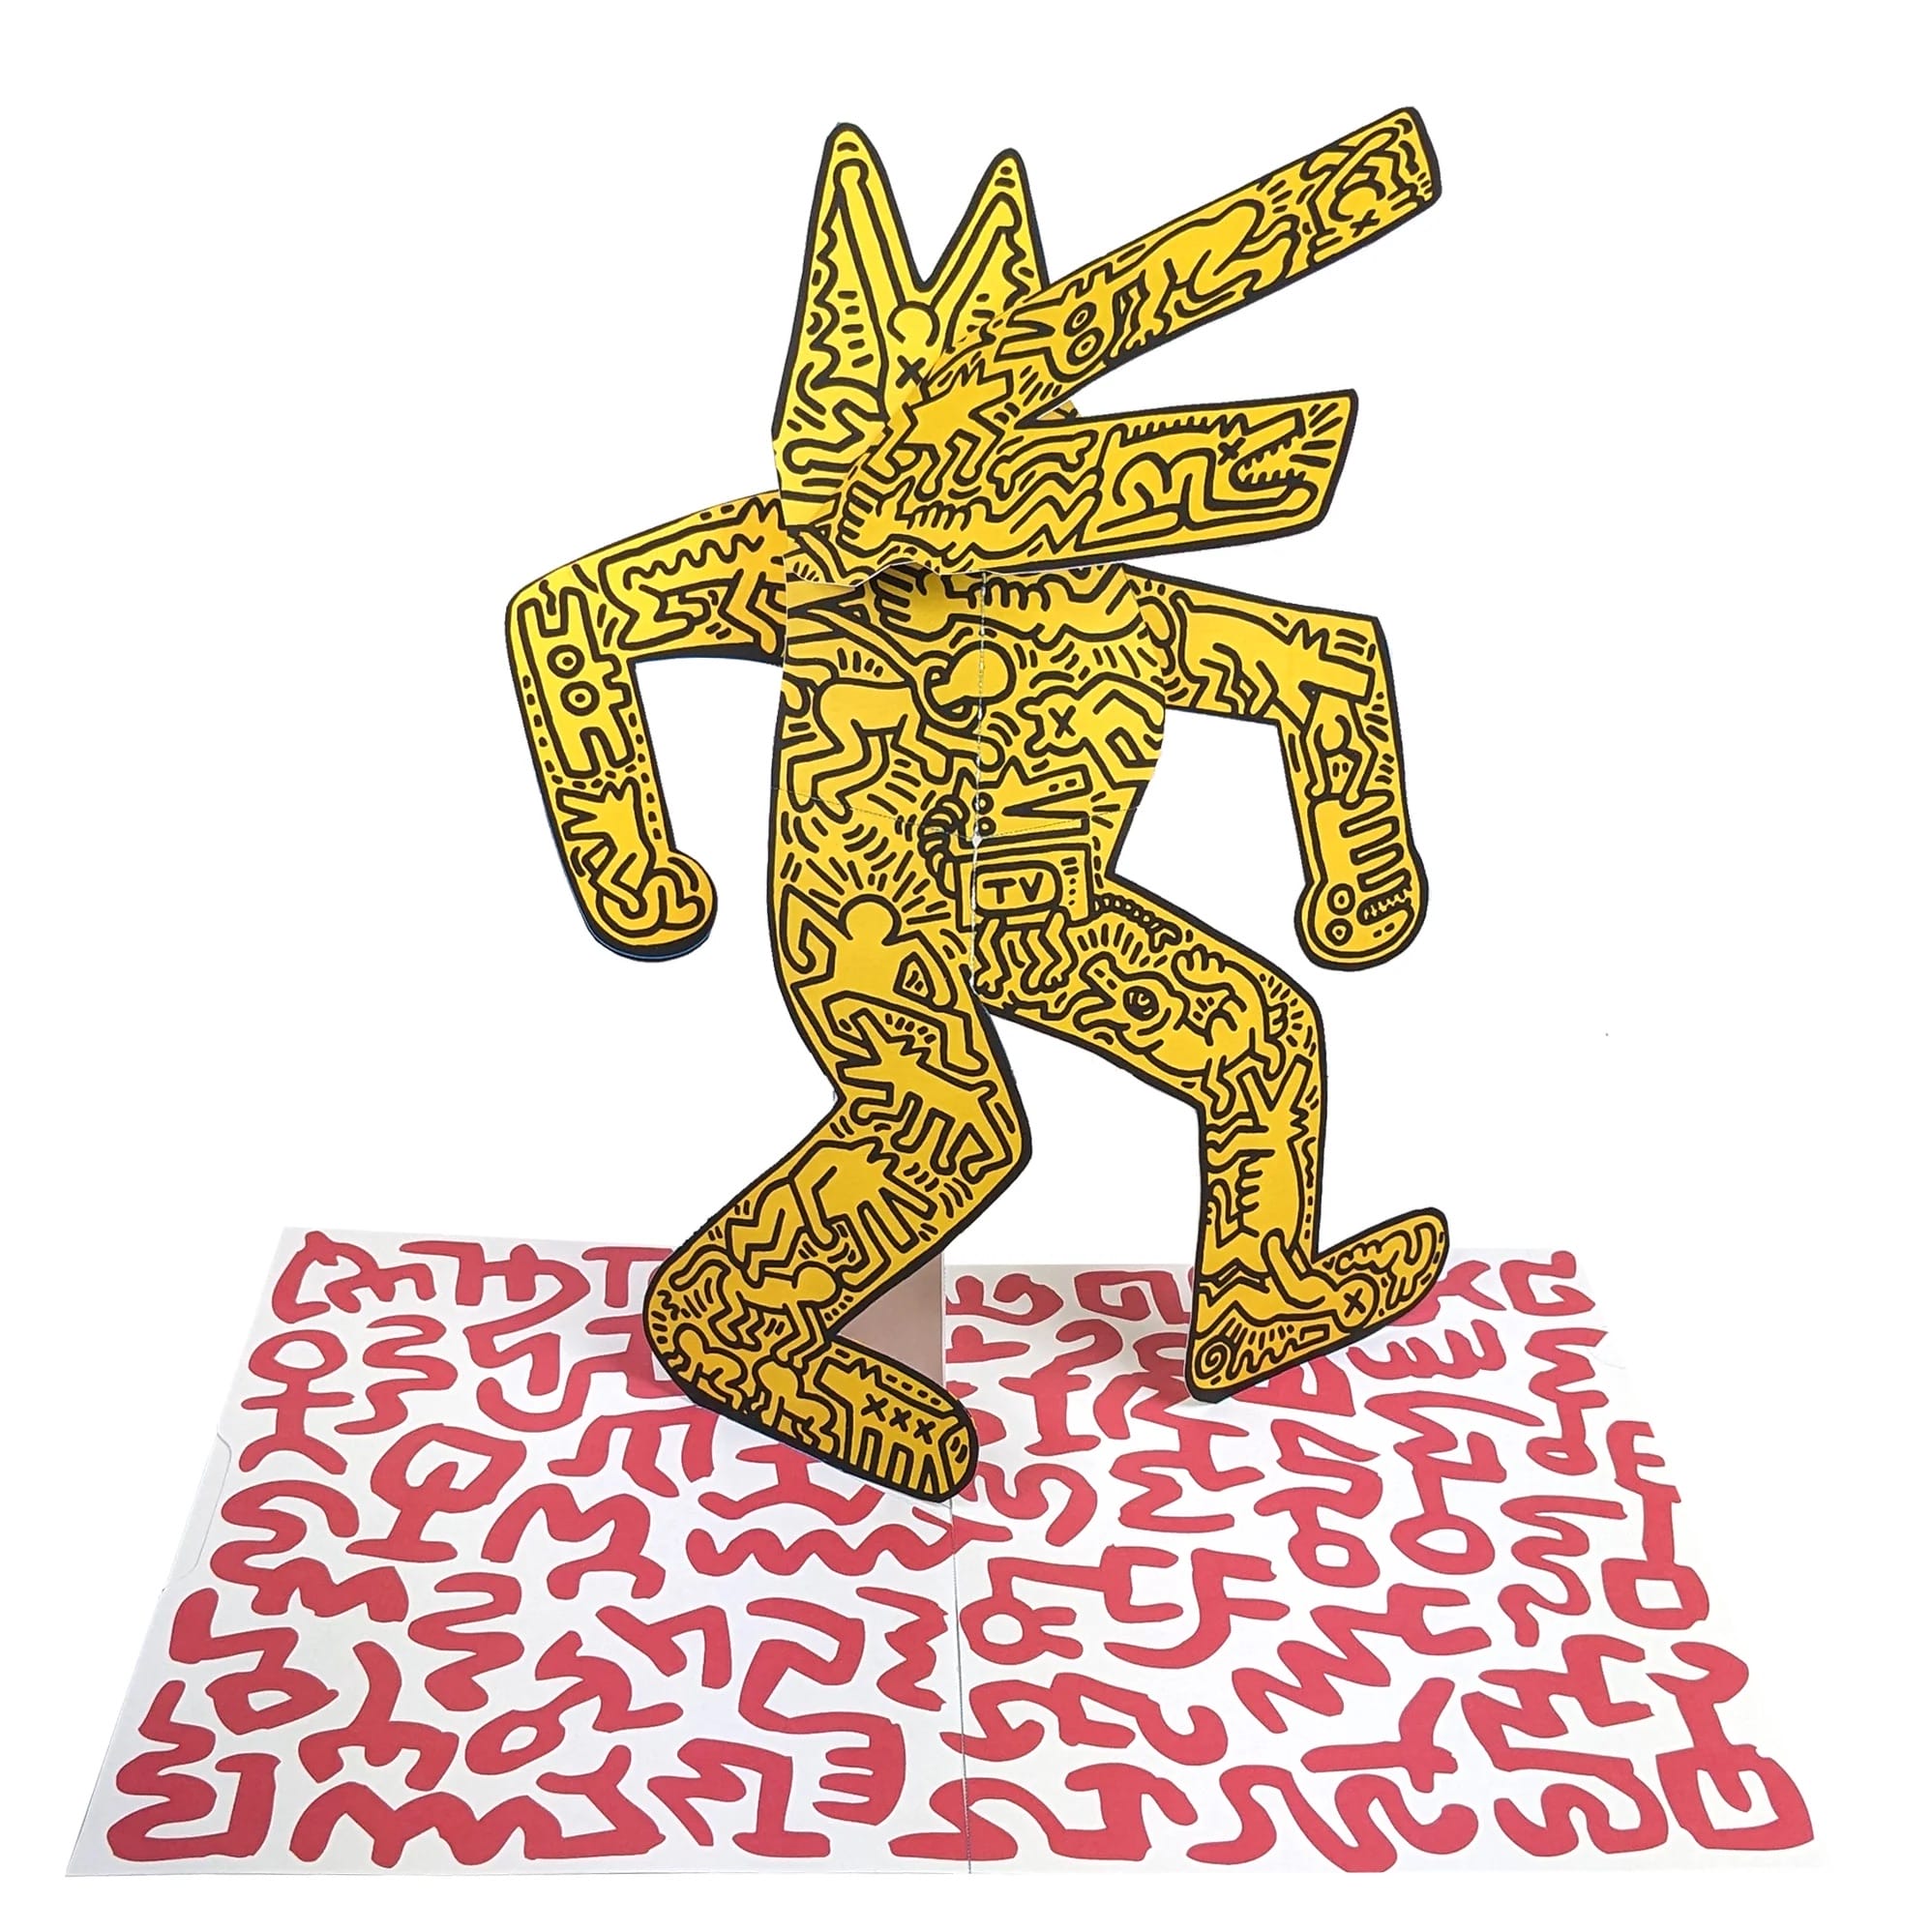 a pop-up paper dog figure with a yellow body and little black doodles inside of various shapes and other figures, by Keith Haring from a pop-up book